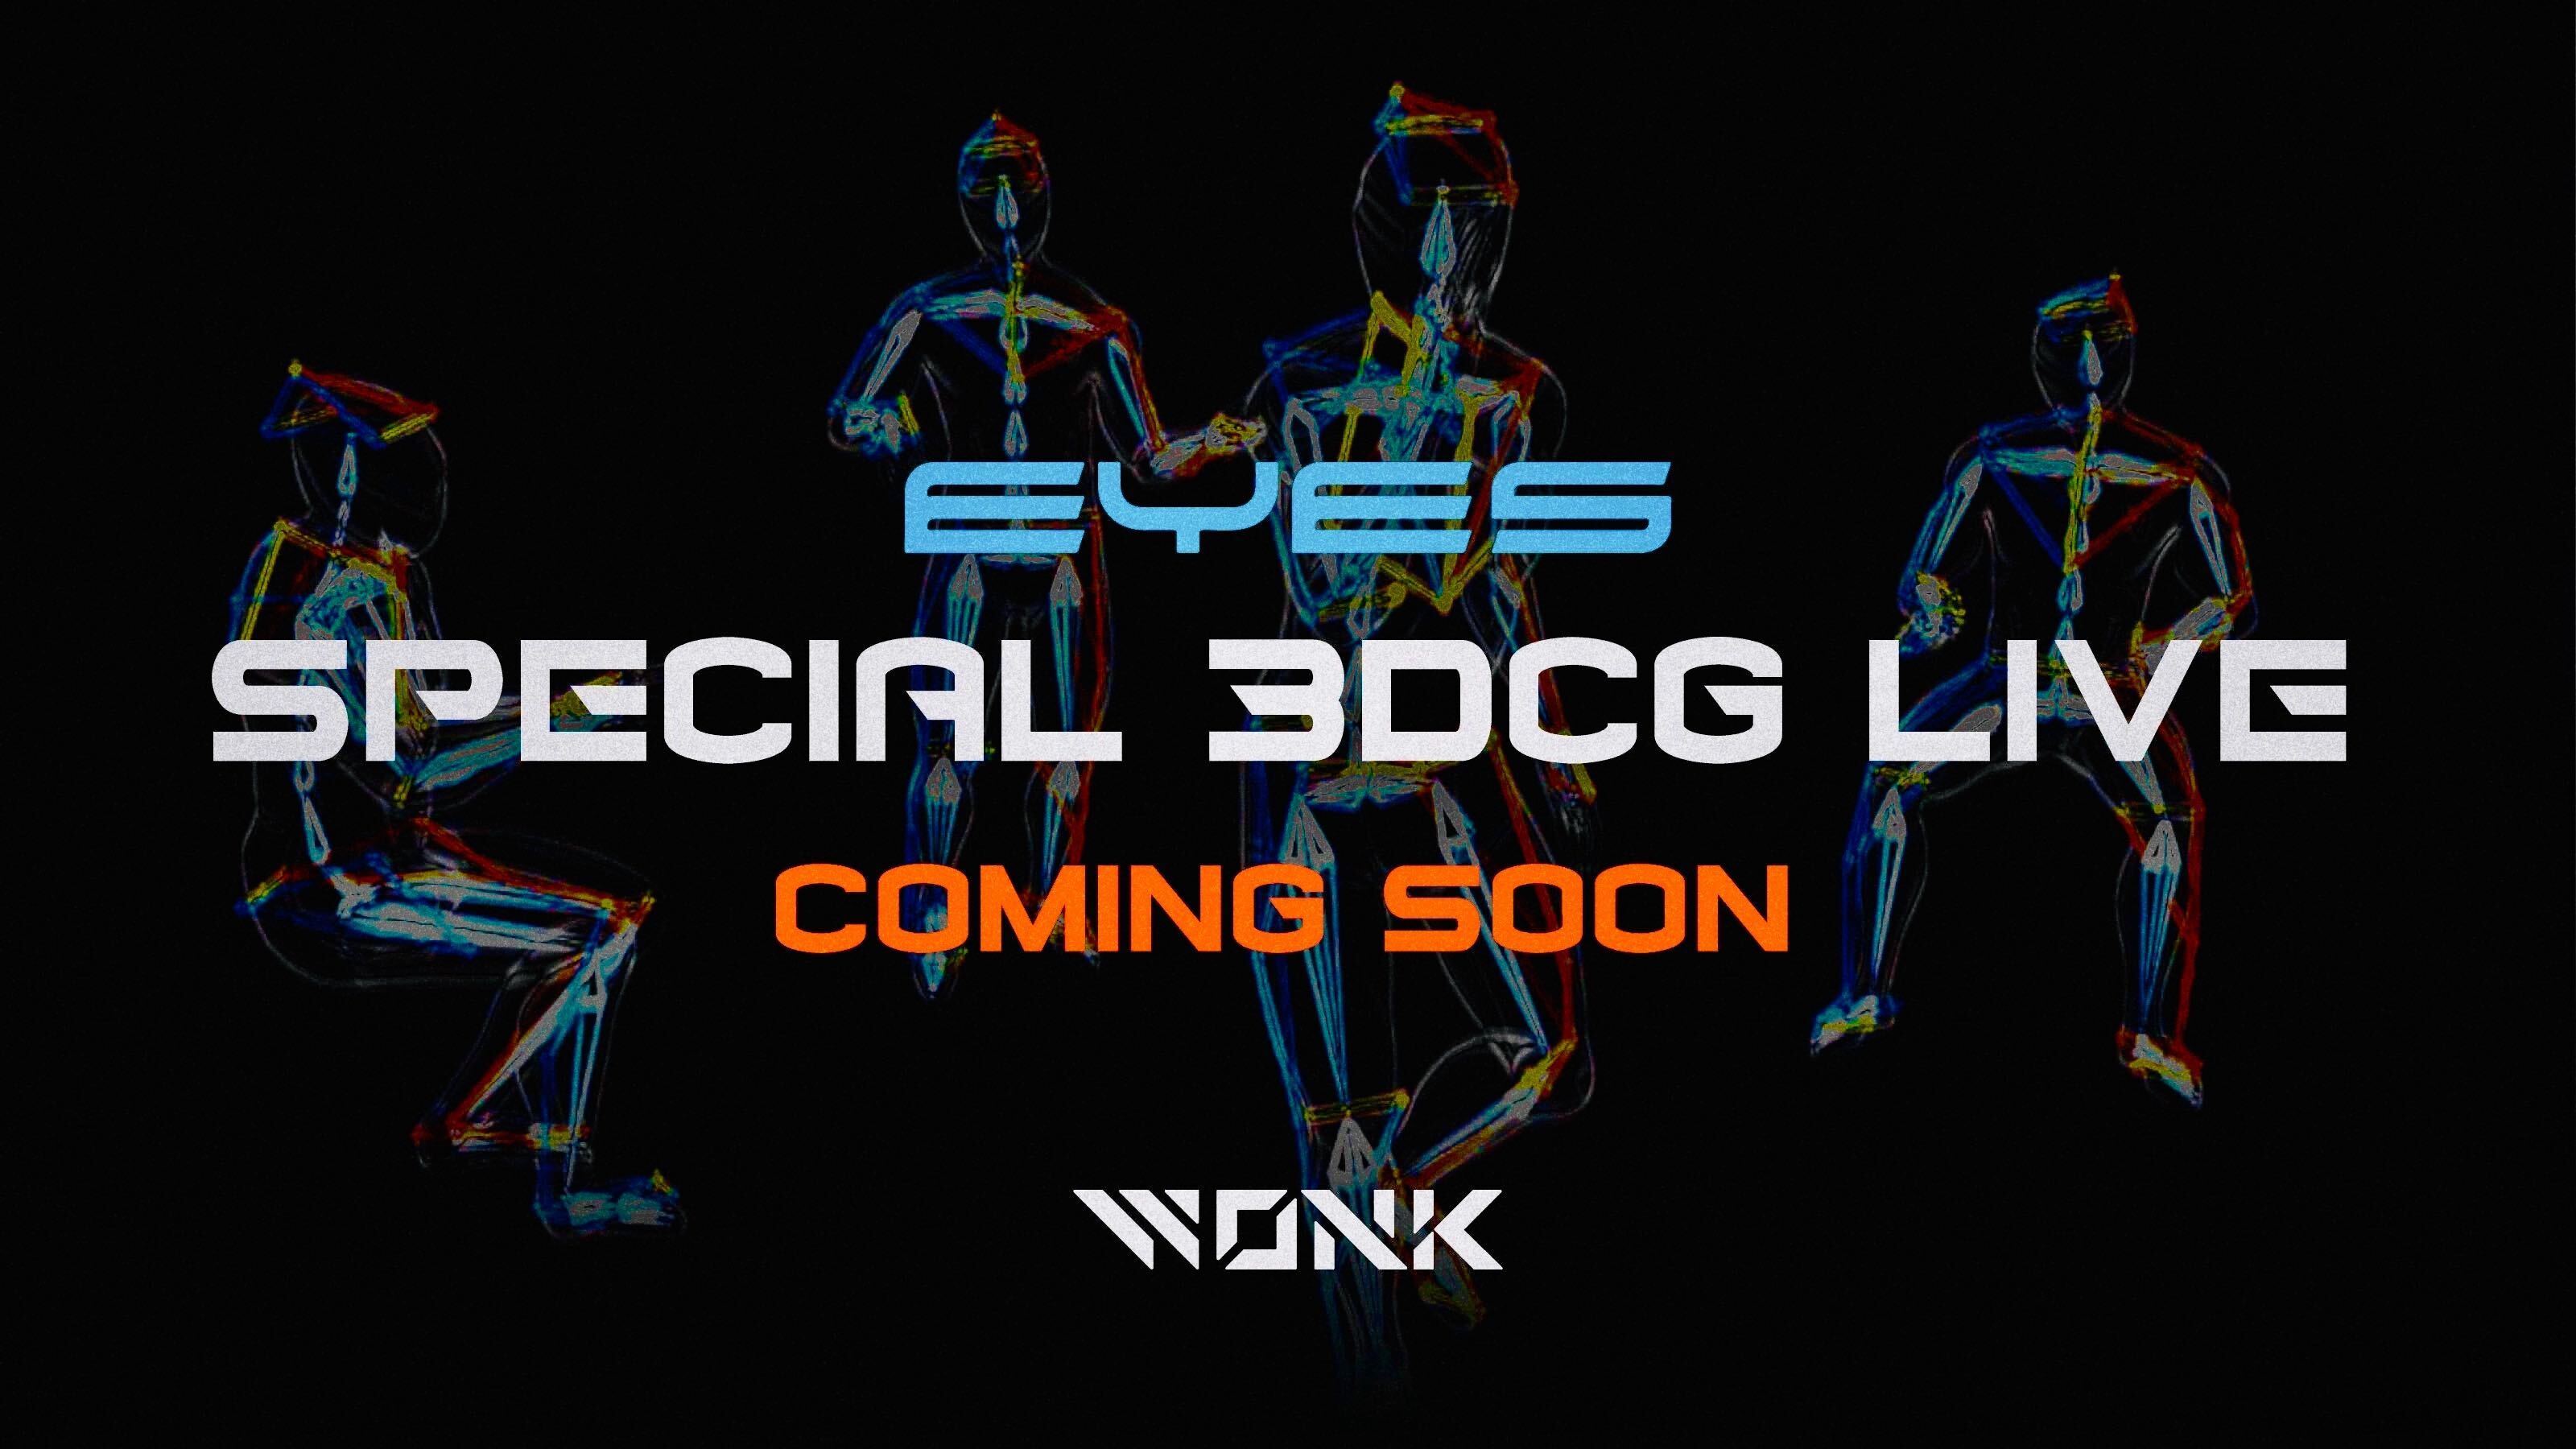 『EYES SPECIAL 3DCG LIVE』